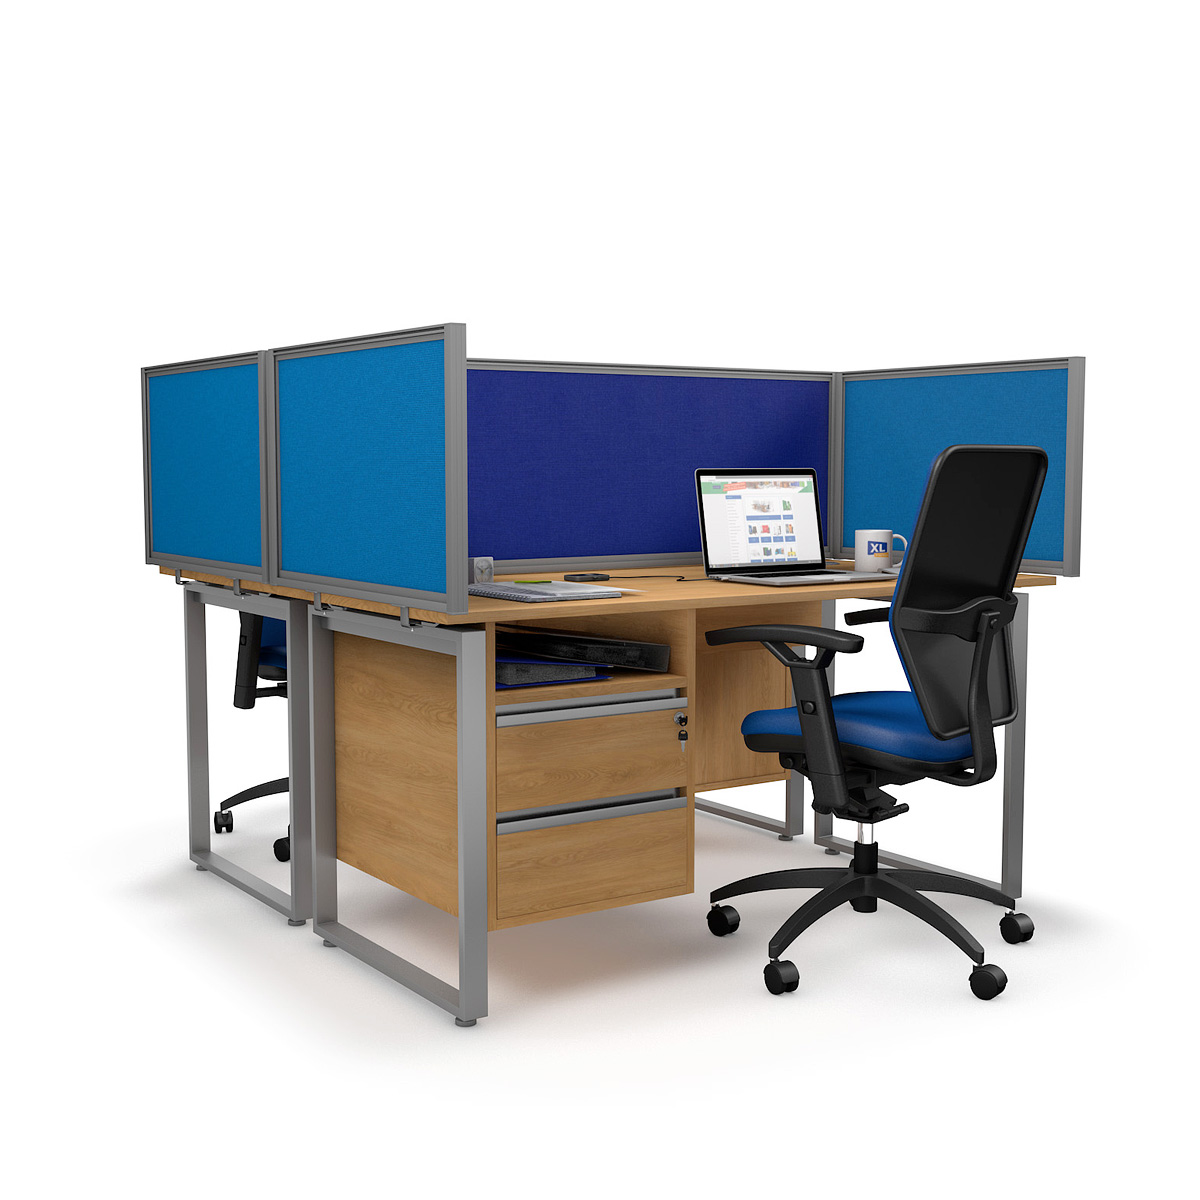 FRONTIER® Acoustic Desk Screens Helps to Reduce Office Noise And Distractions